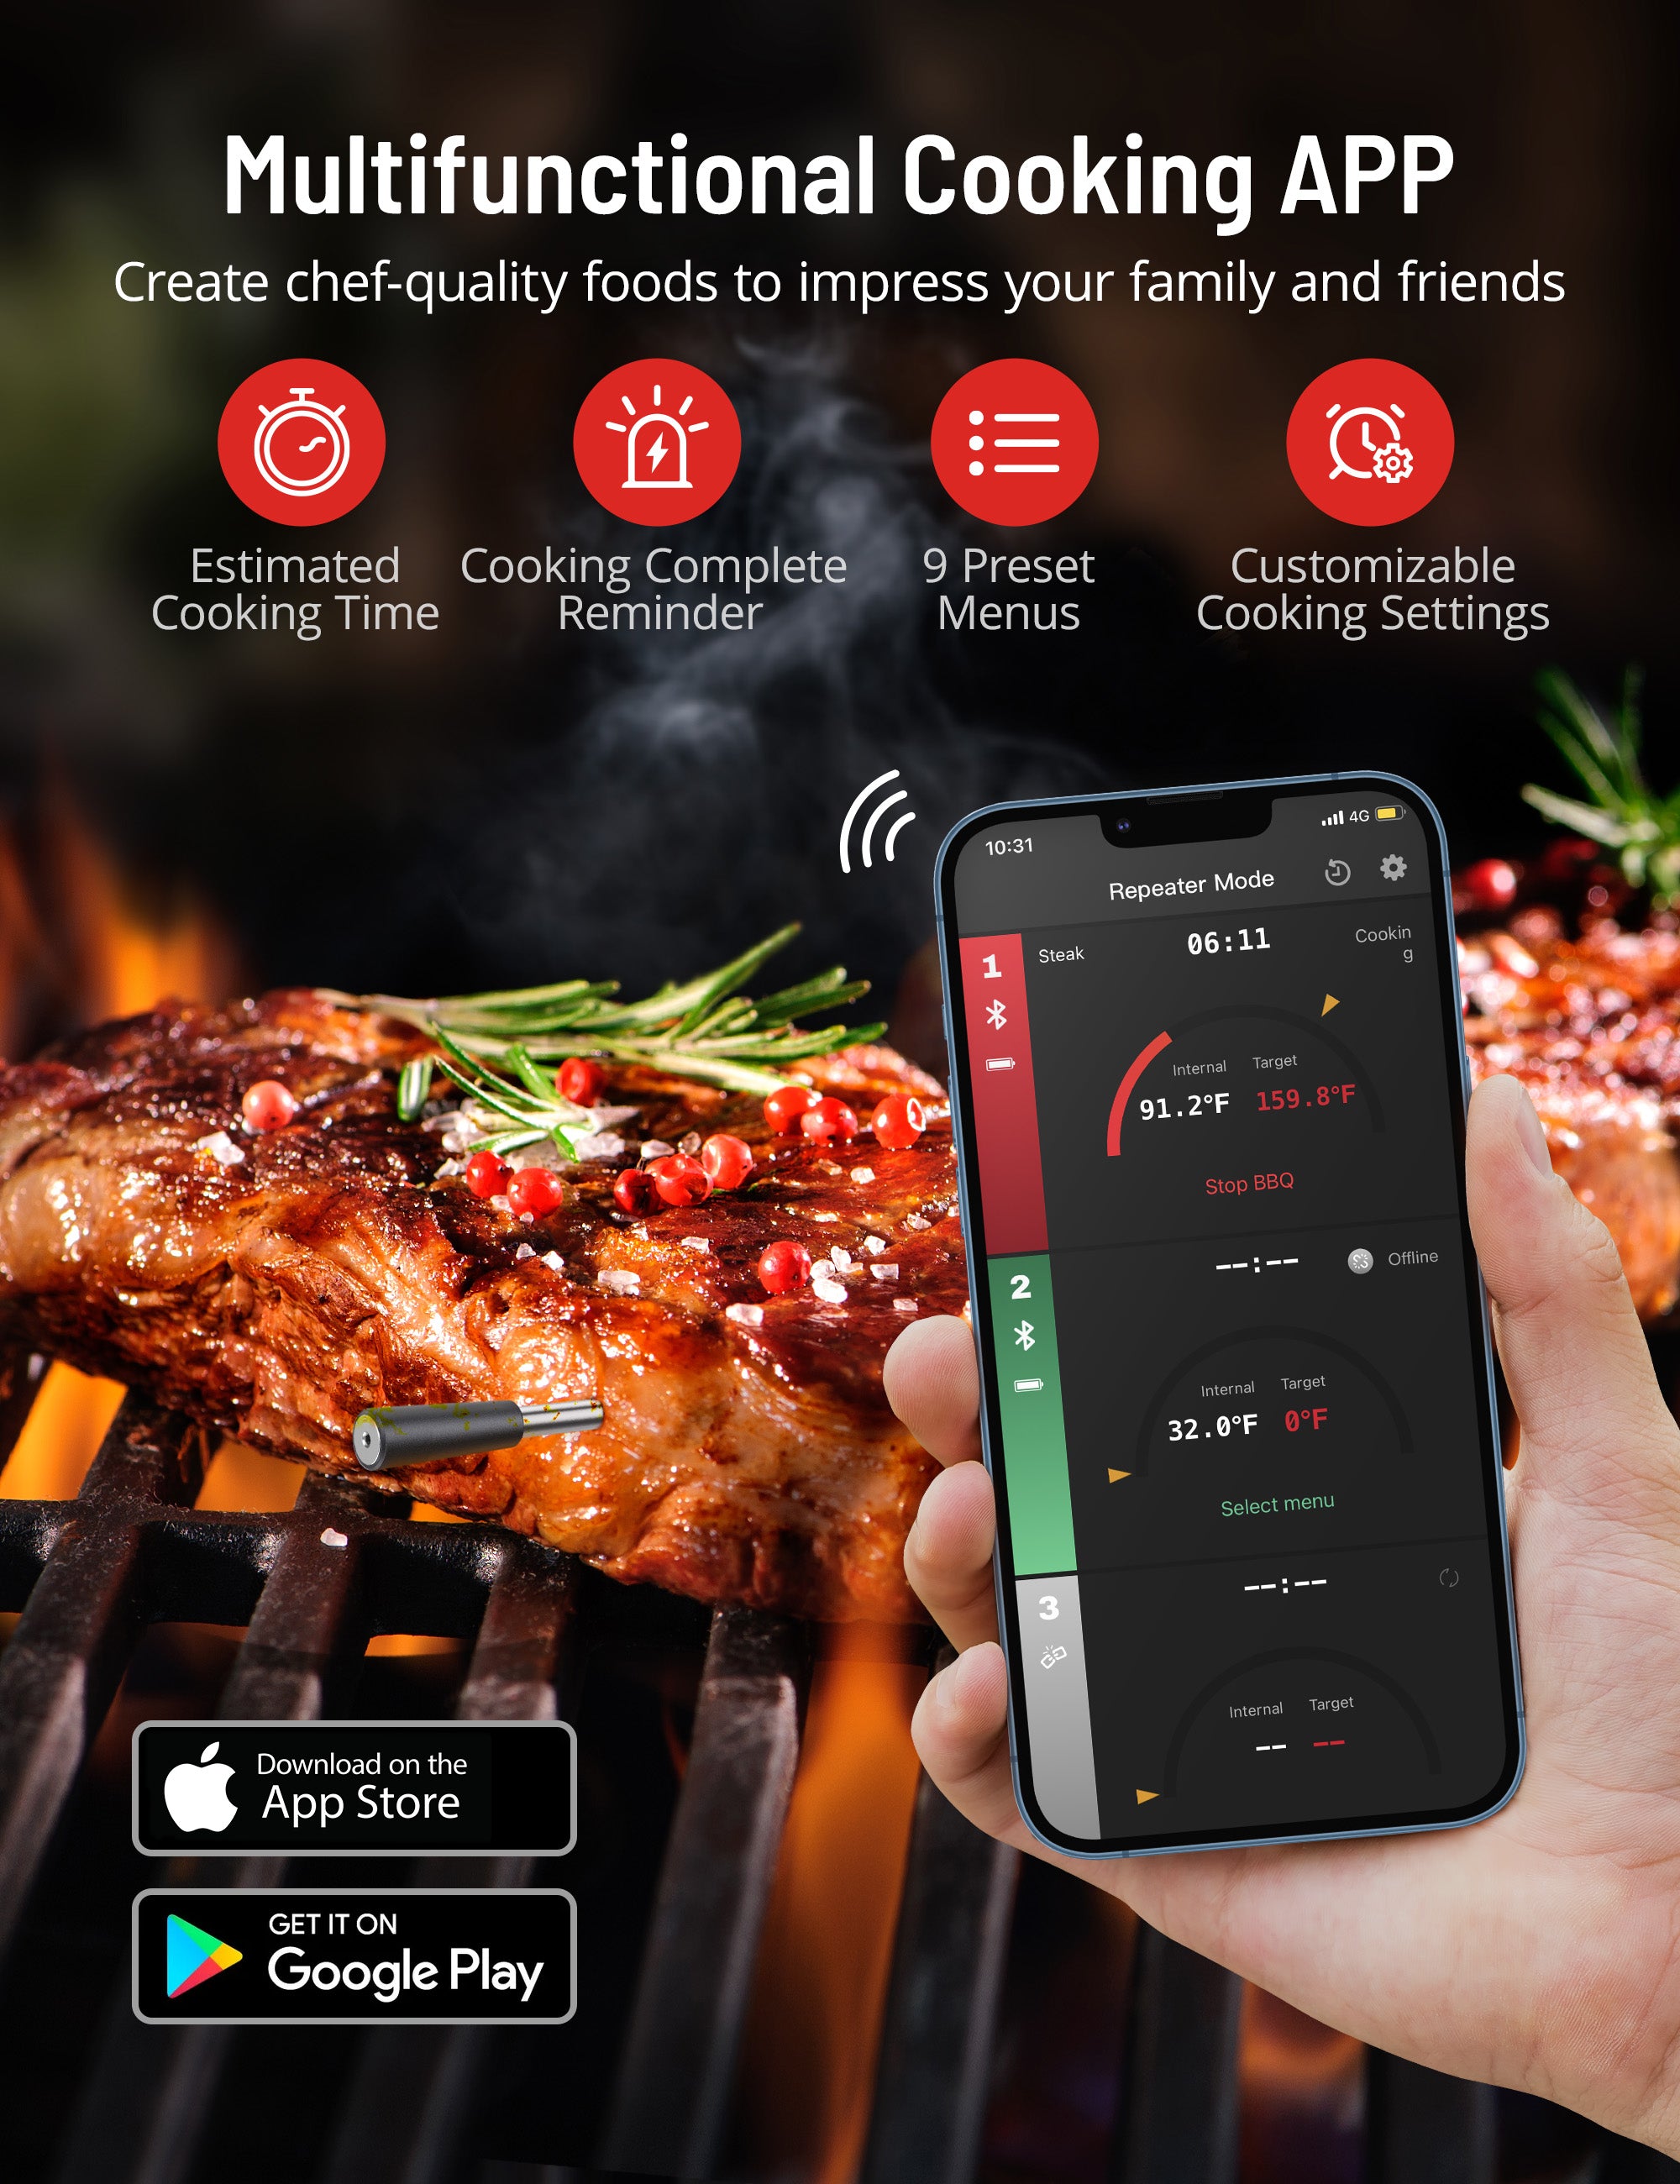 Paris Rhône Meat Thermometer TM001, Advanced APP Cooking Guides Wireless-Cooking Thermometers-ParisRhone